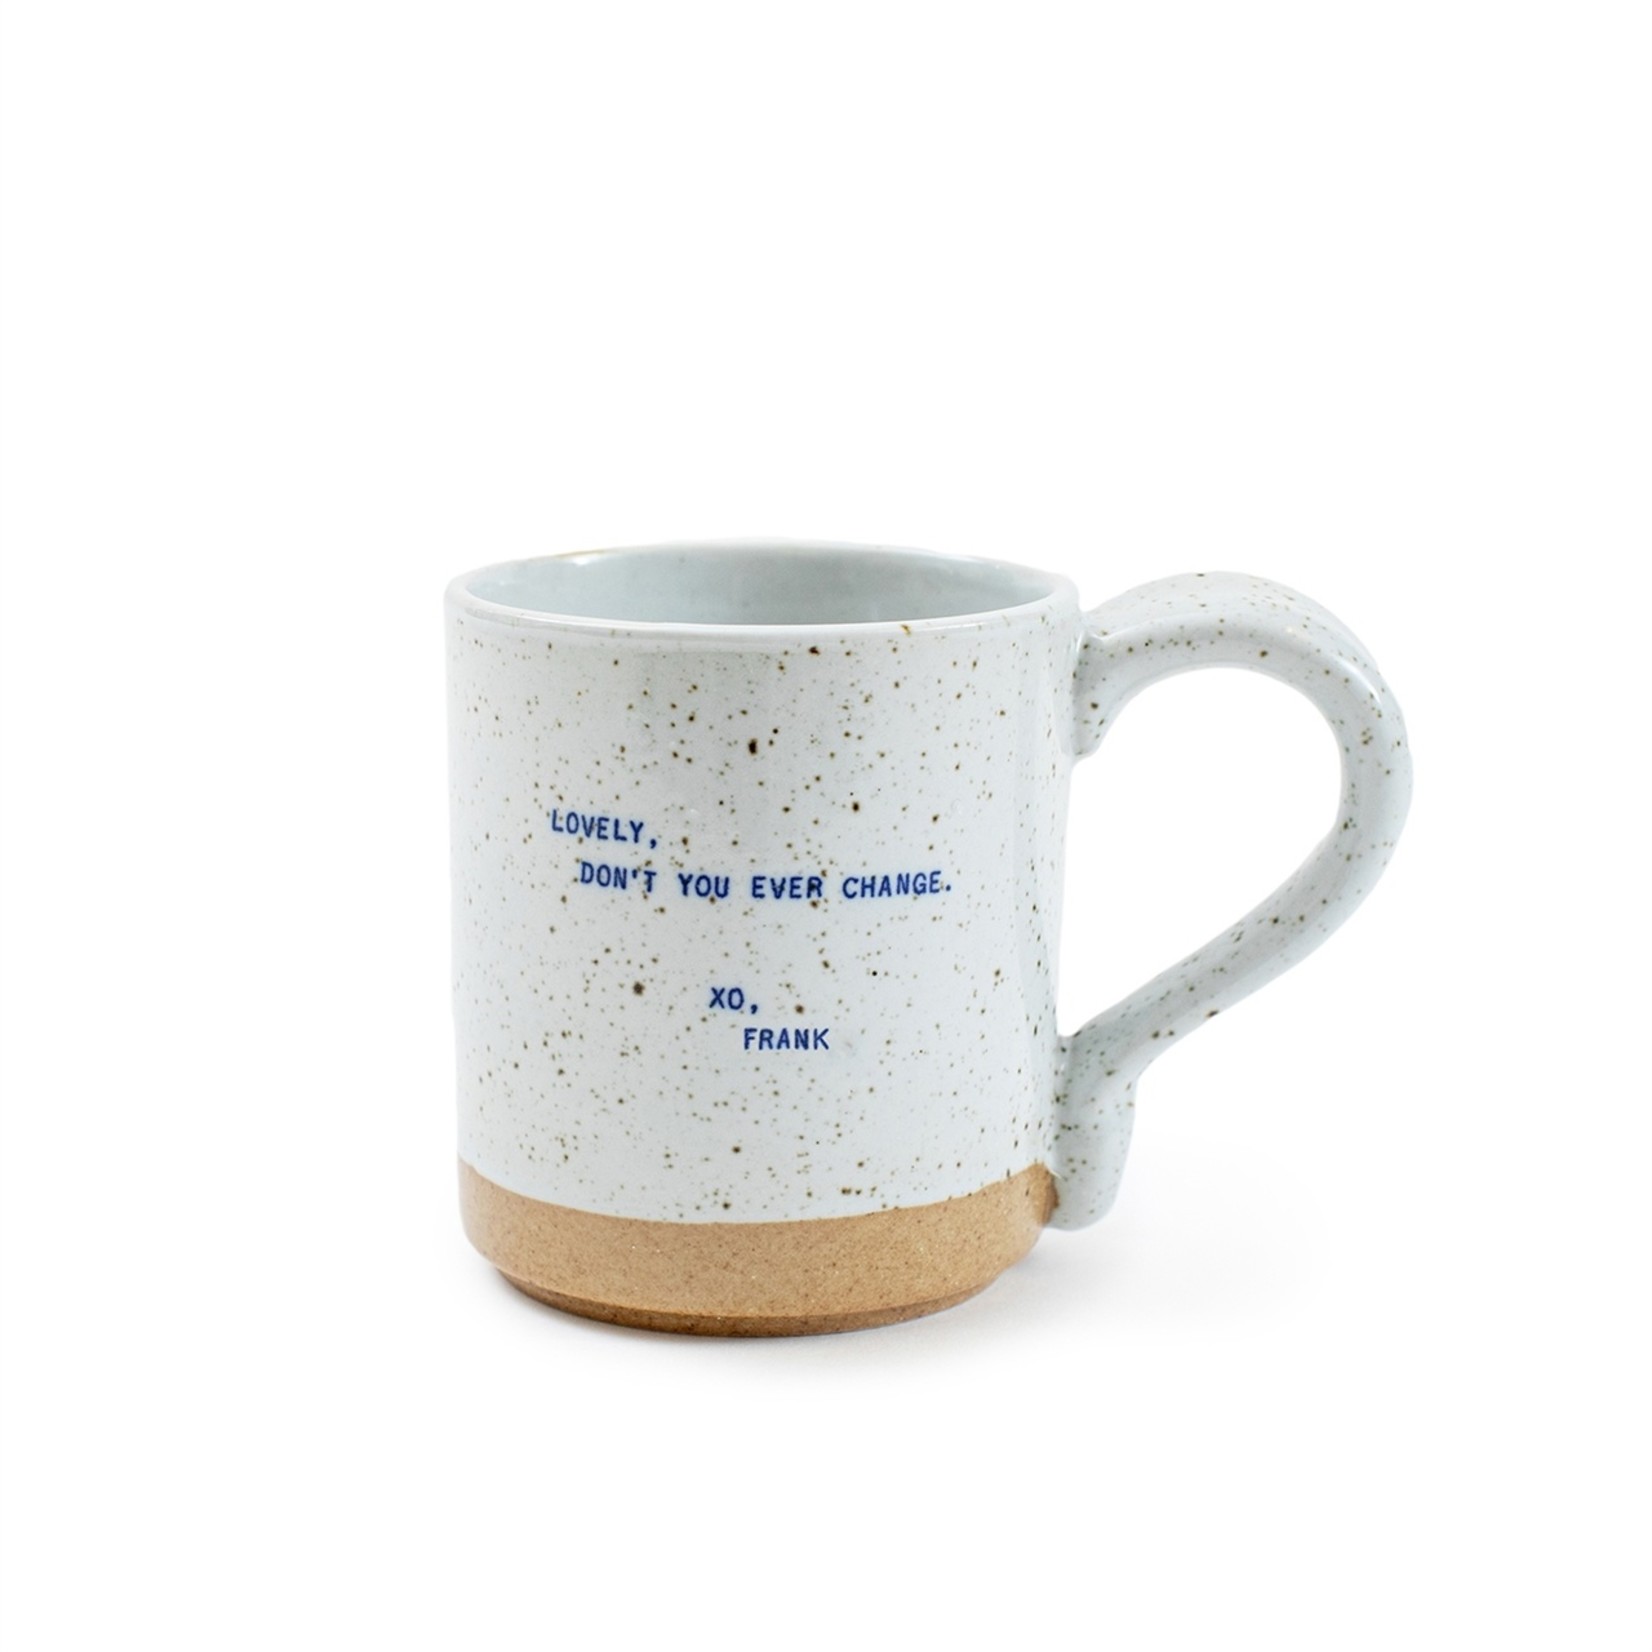 The Diference Between Your Opinion and Coffee Mugs with Sayings